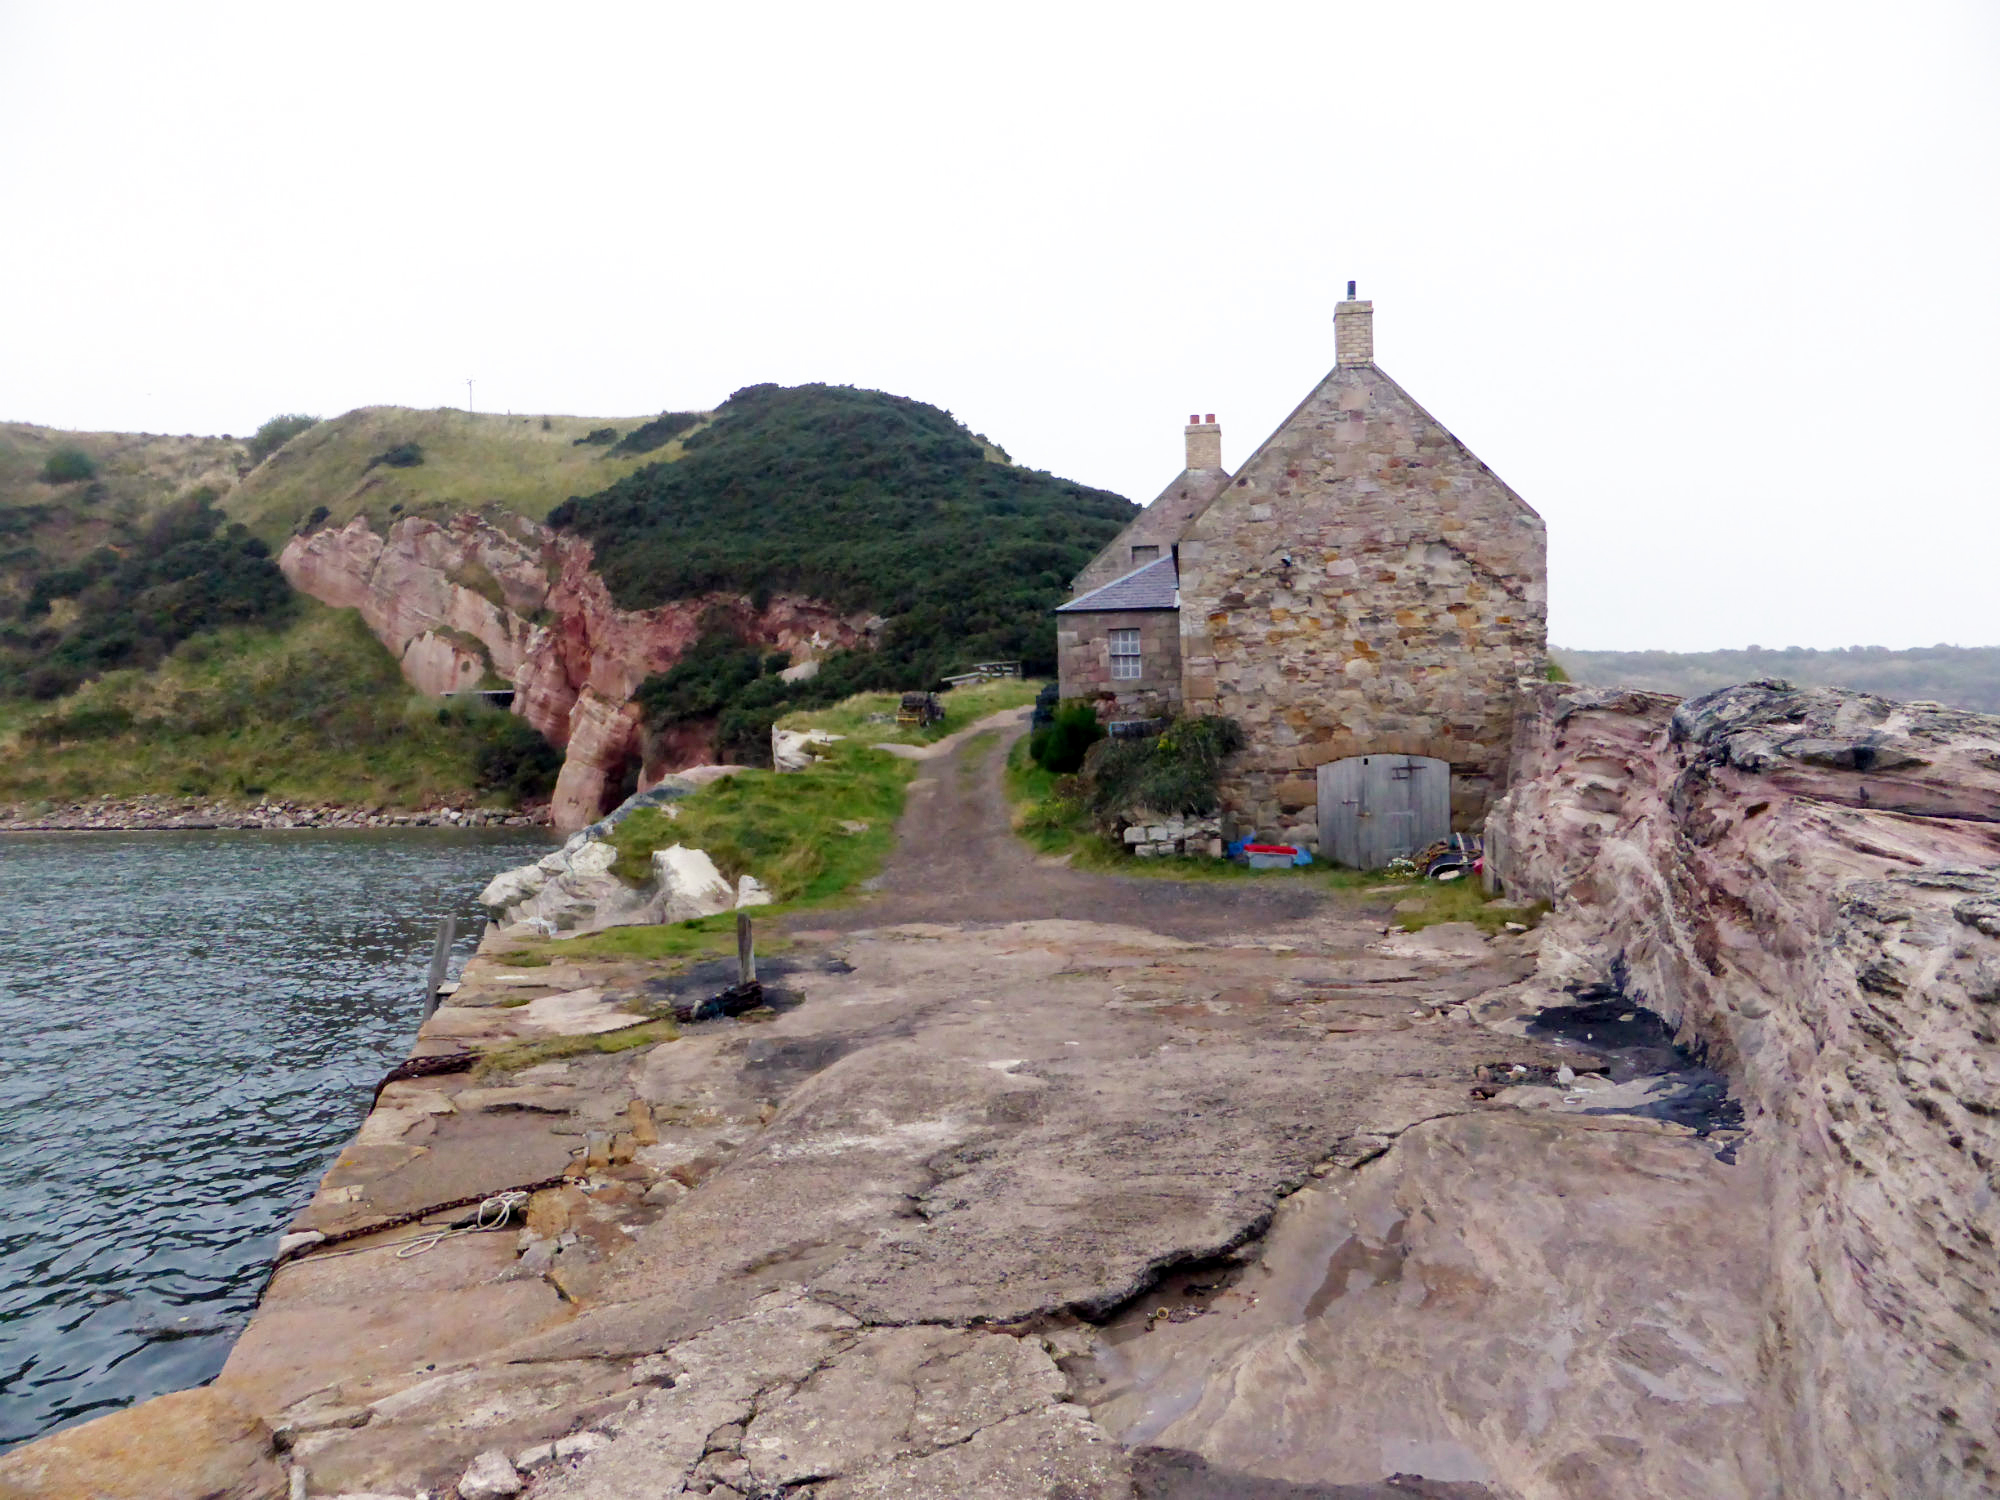 Harbour cottages, looking W